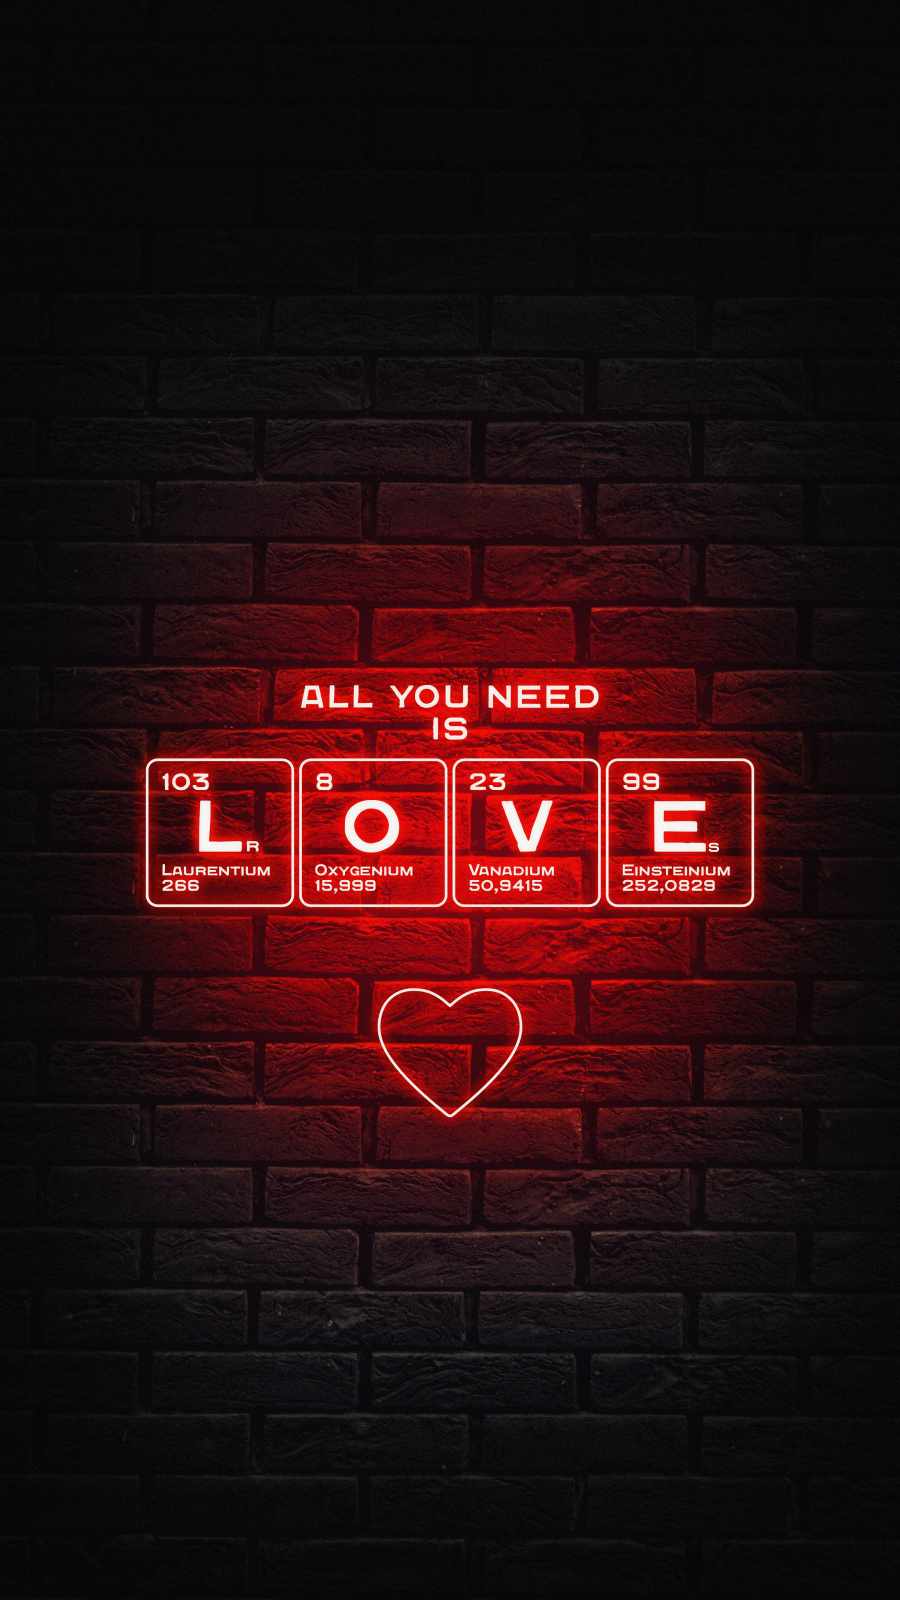 All you Need is Love iPhone Wallpaper